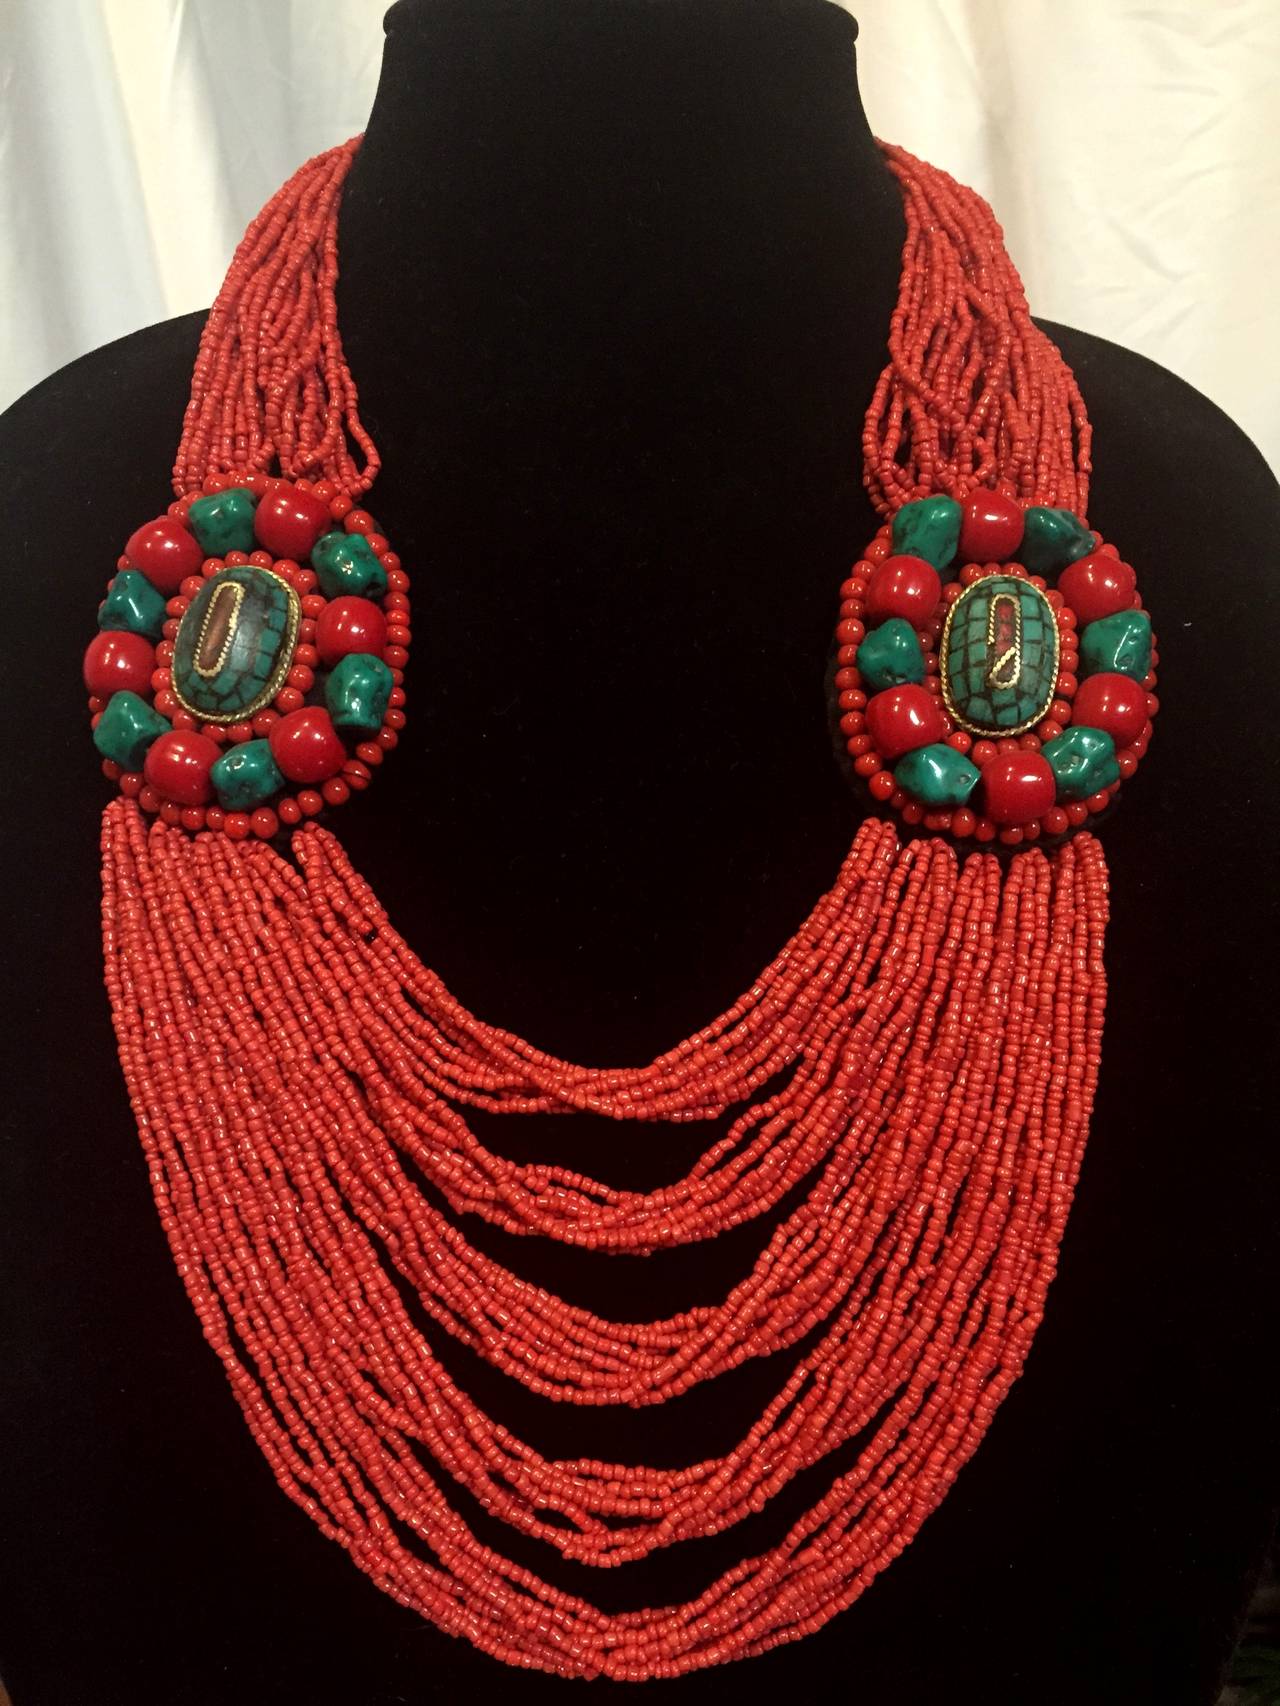 A collection of beautiful Tibetan necklaces. Materials include bone, glass, faux amber/turquoise/coral, silver metal and resin. Each piece is meticulously hand made by the Tibetan women at the foot of the Himalaya. This collection consists some of